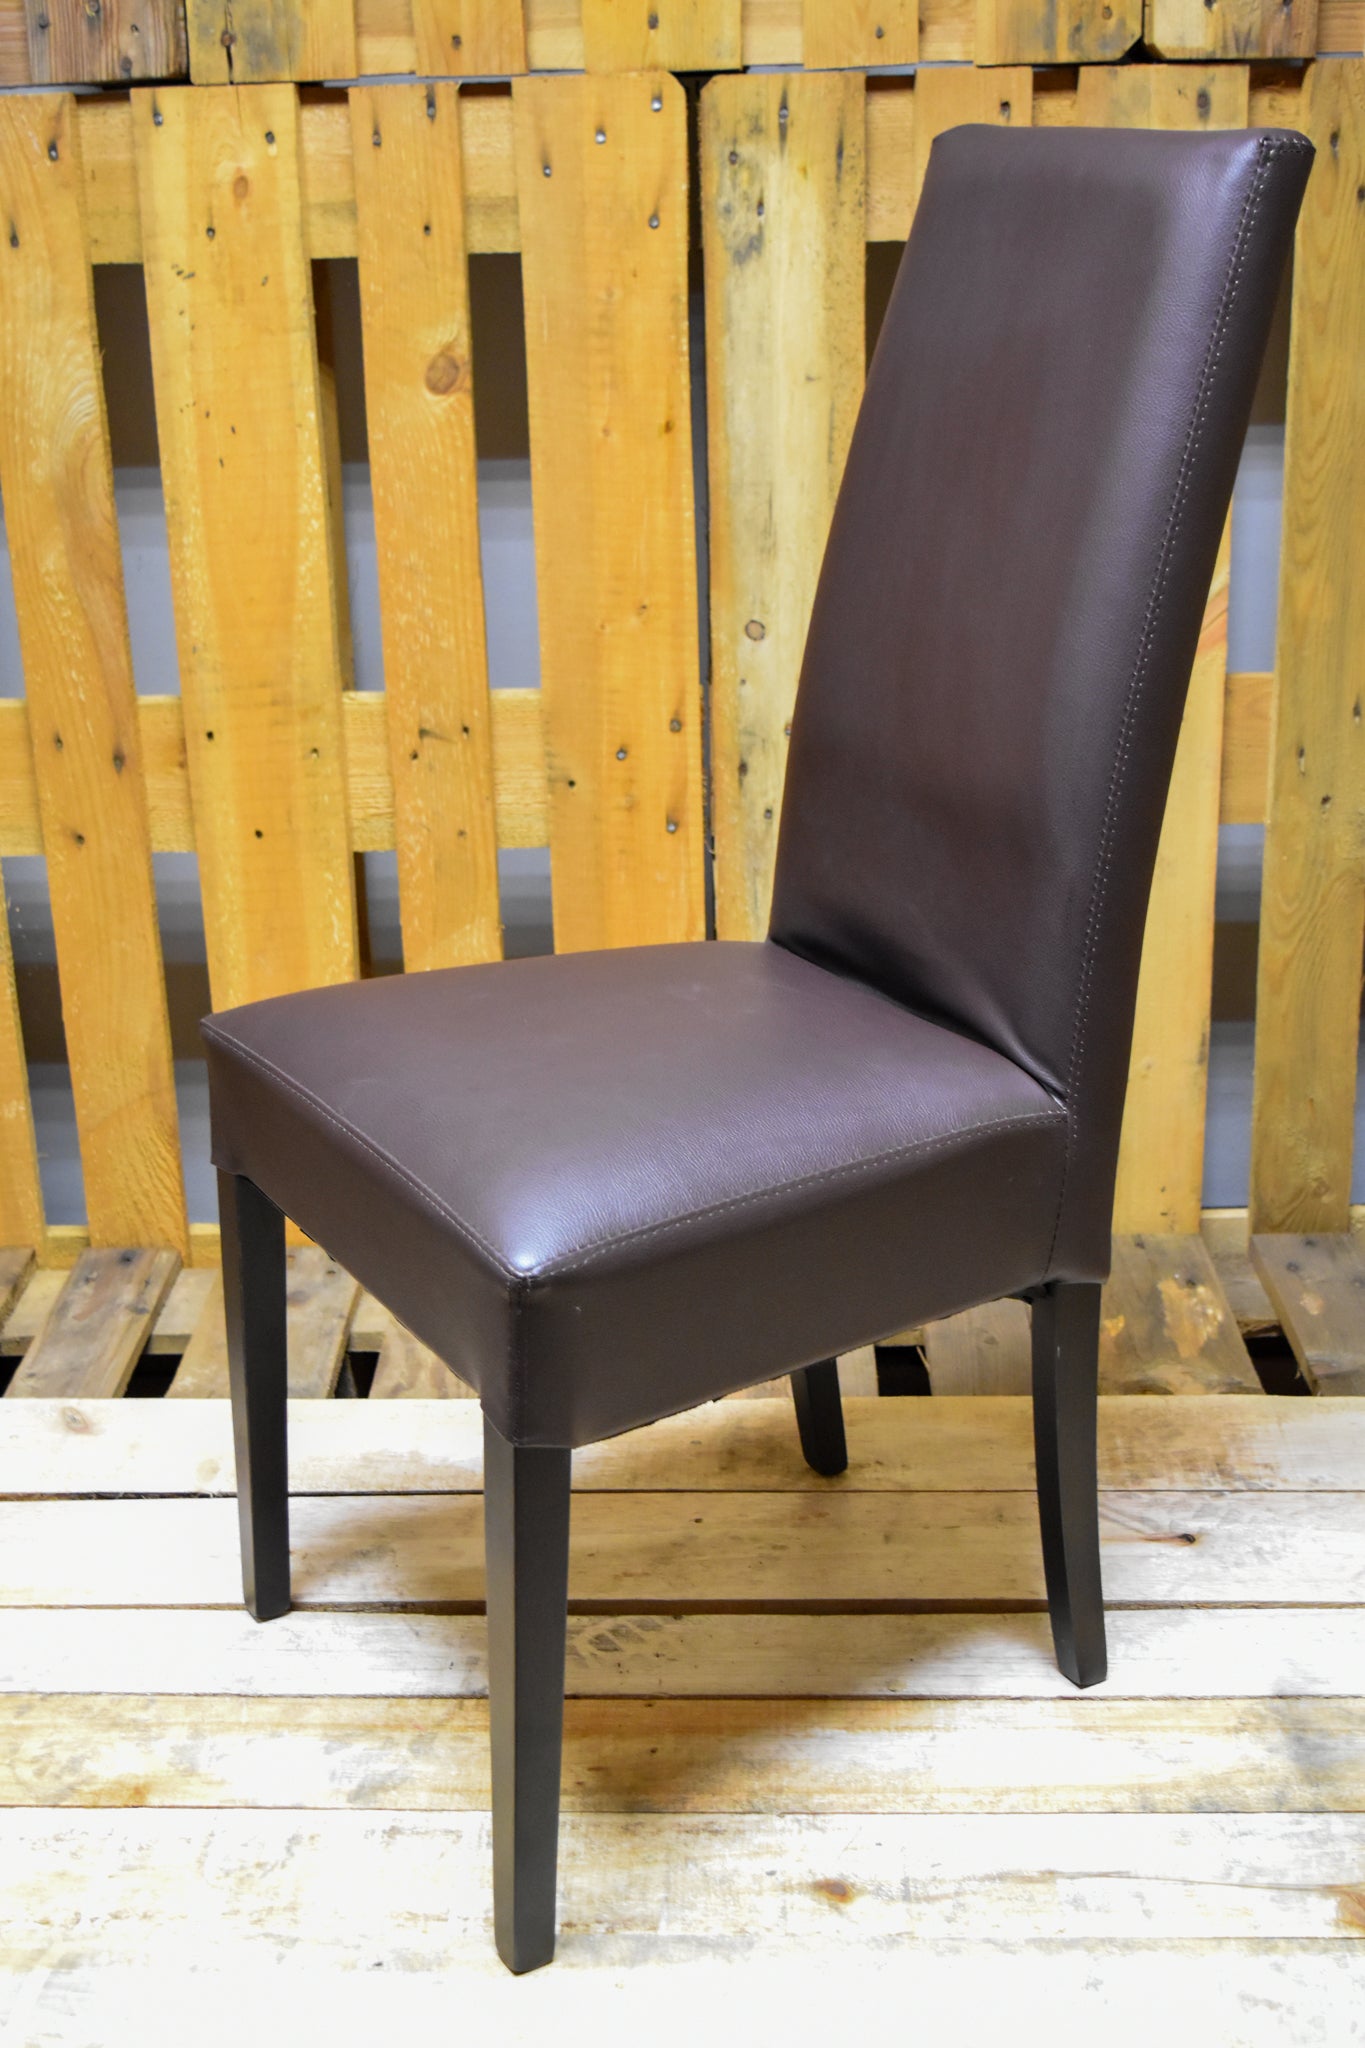 Stock chairs model 36 upholstered in imitation leather, mocha color, wenge color legs